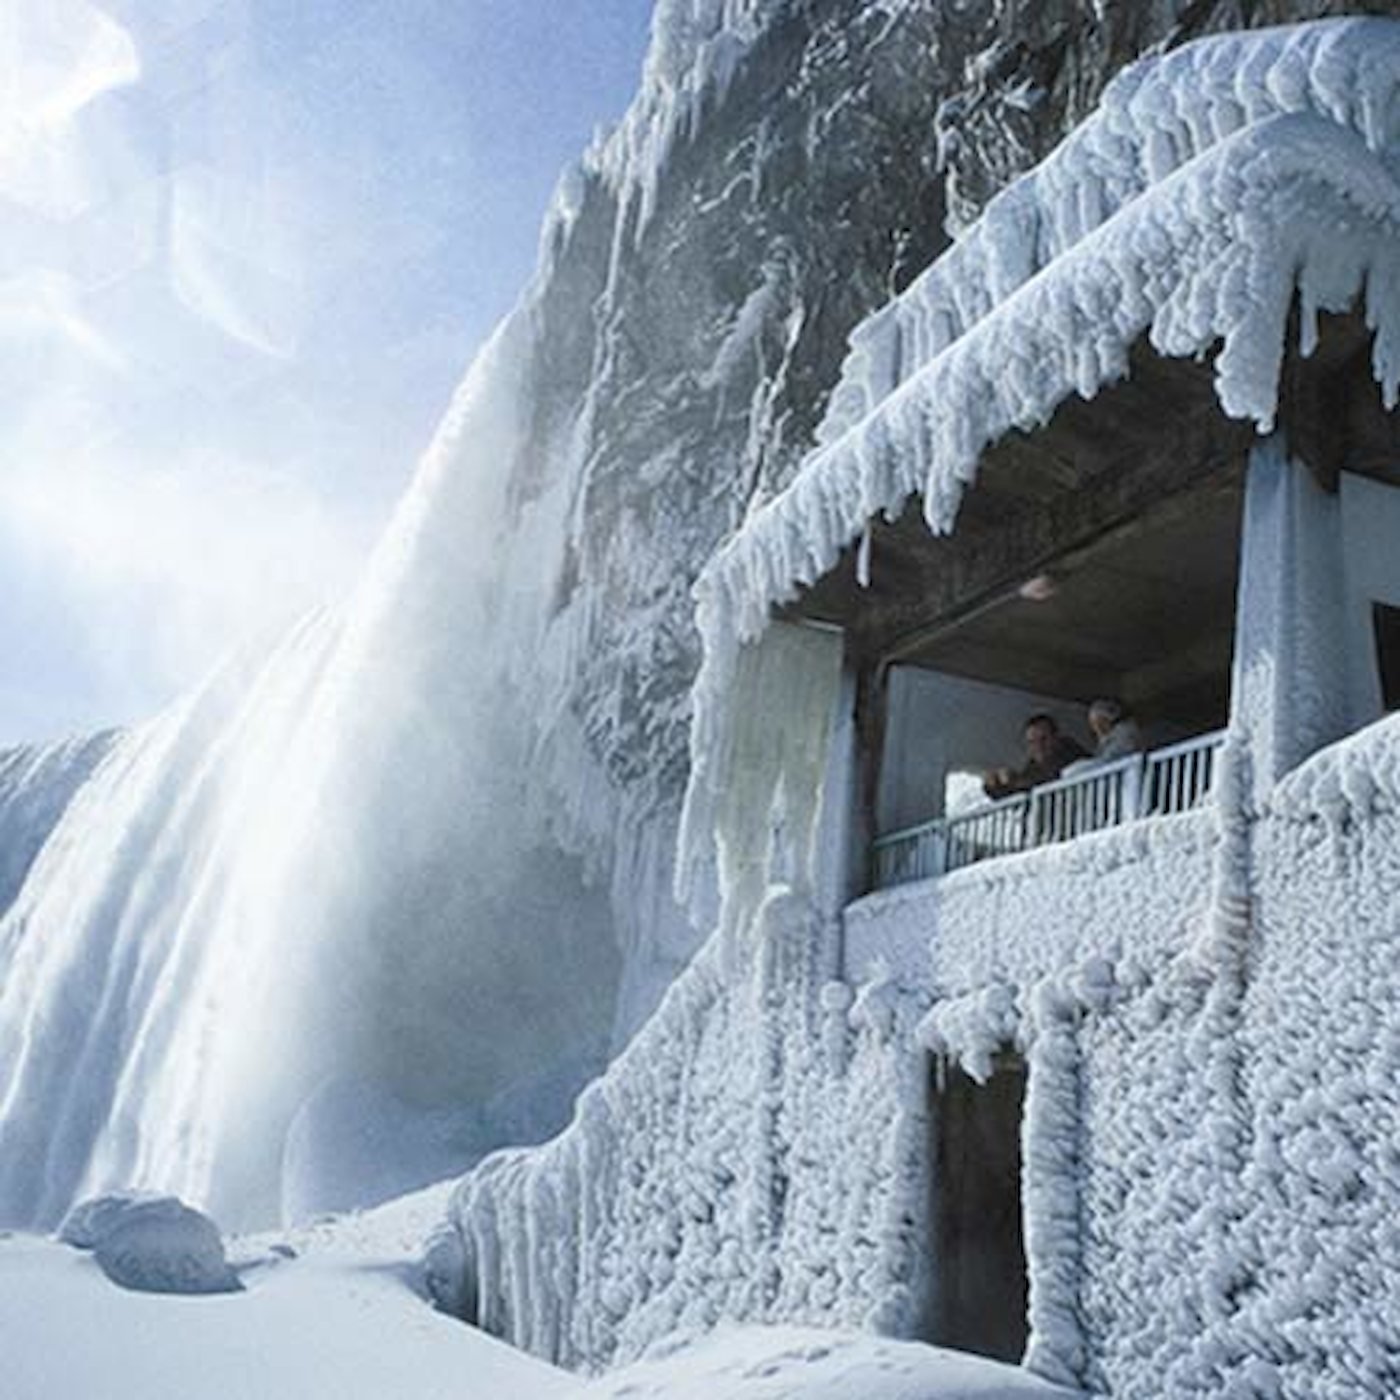 is journey behind the falls open in winter